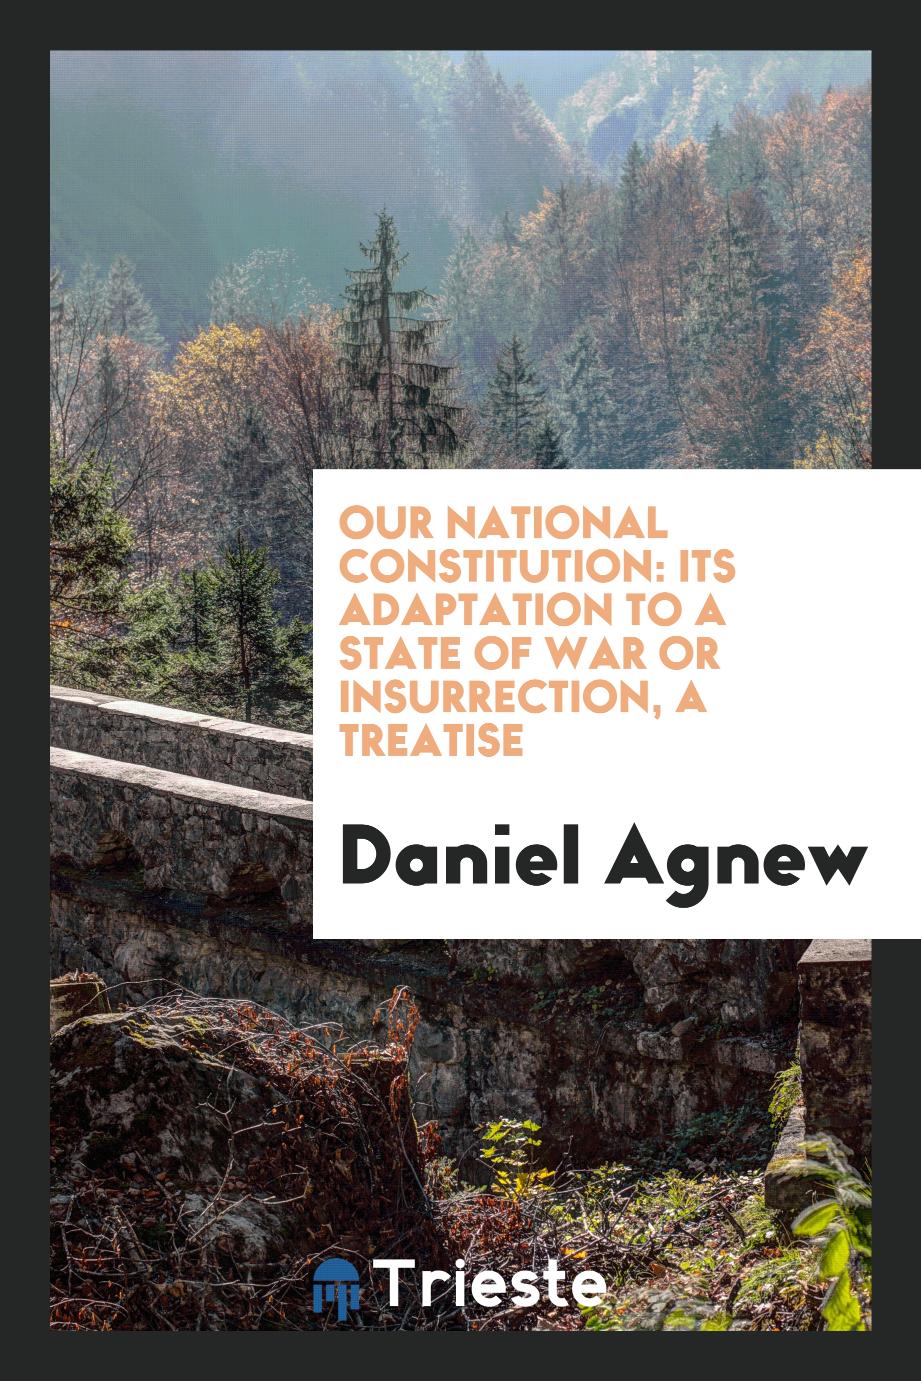 Our national Constitution: its adaptation to a state of war or insurrection, a treatise